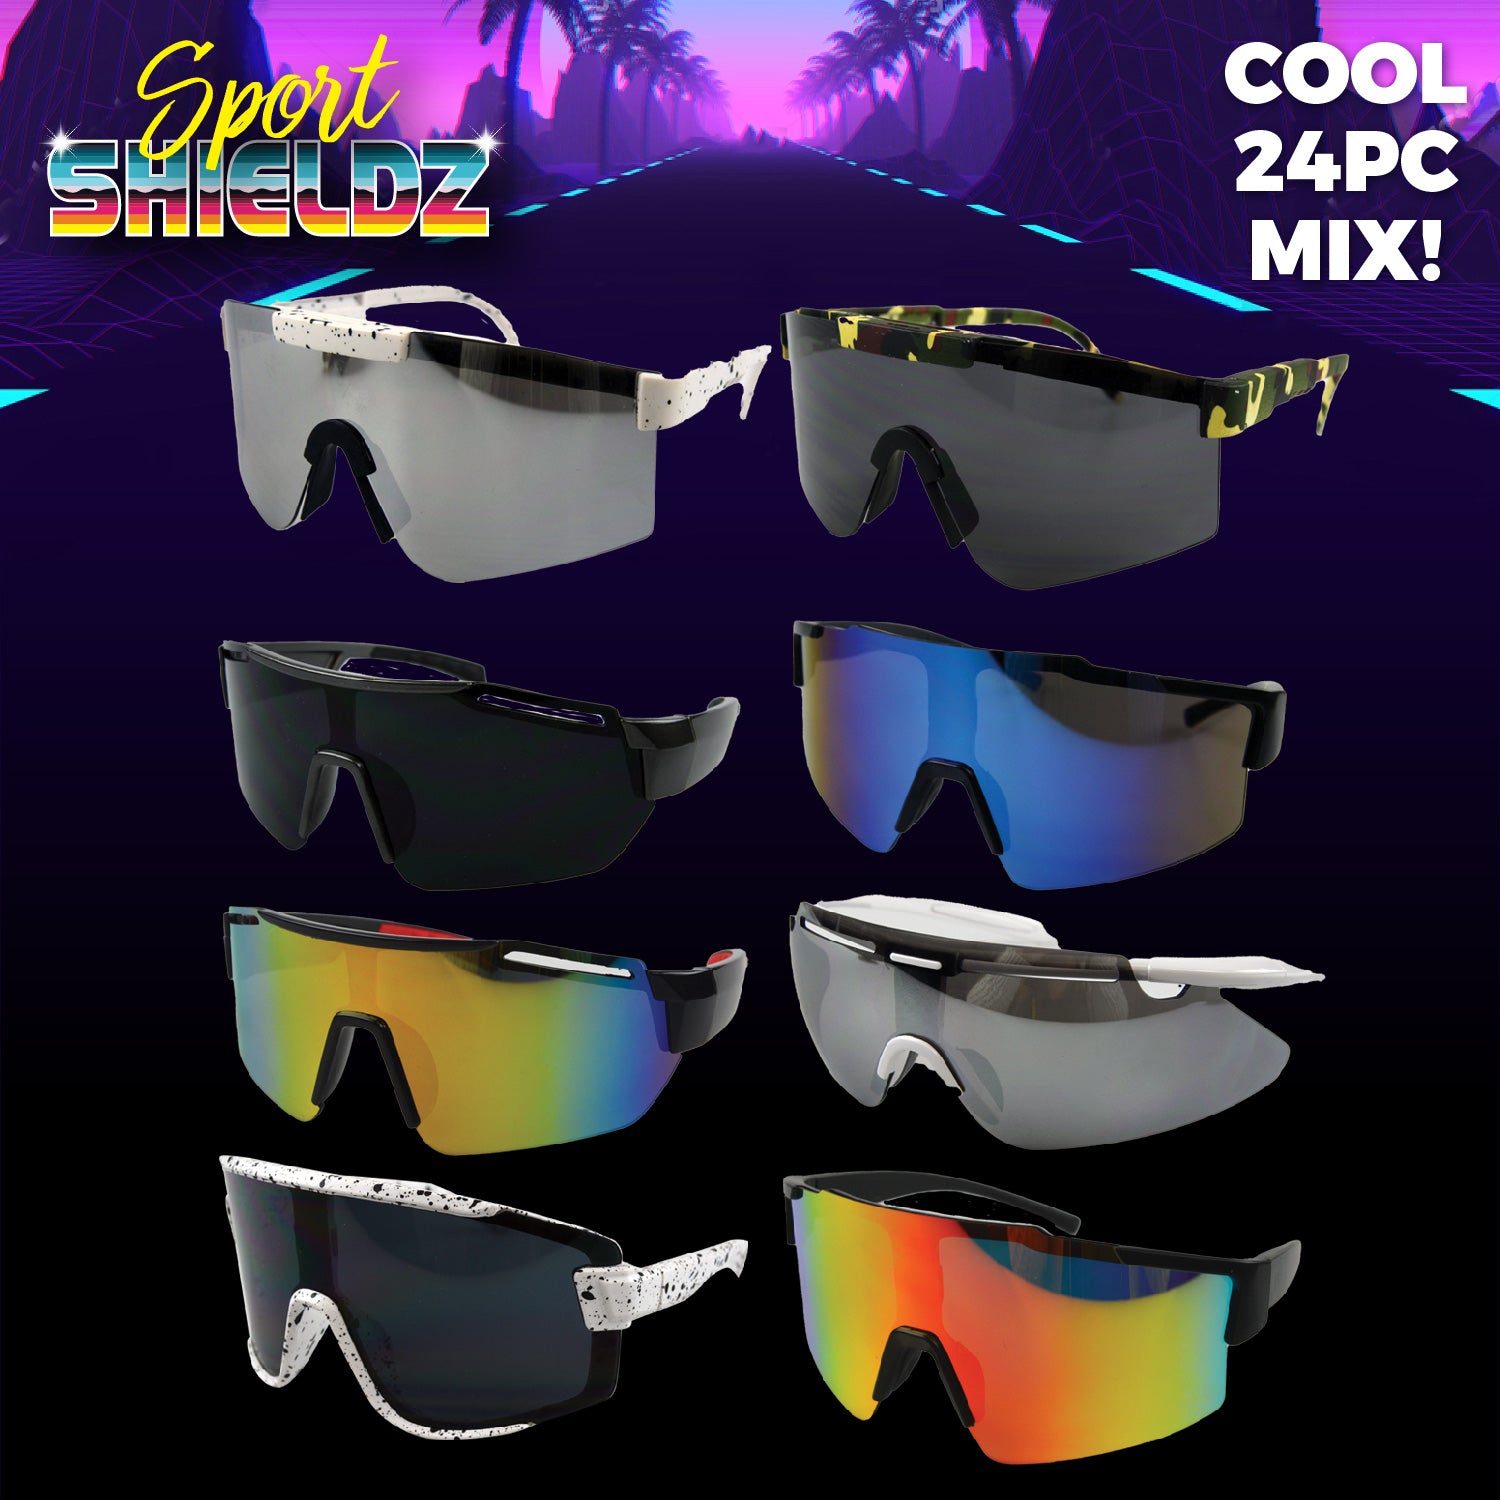 Marvel Sunglasses - Display for wholesale sourcing !